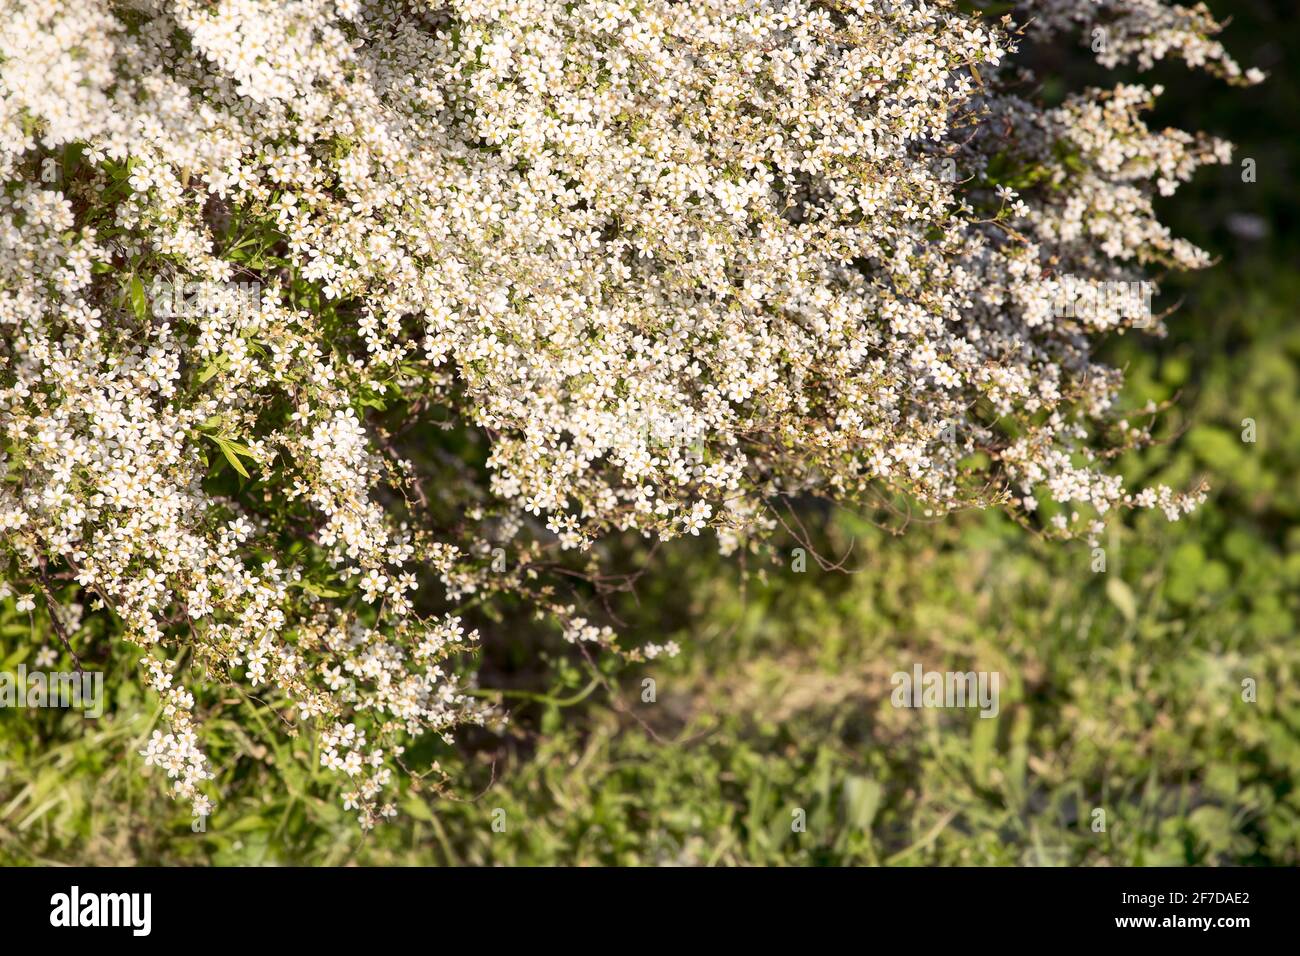 Blooming shrub, white tiny flowers with green grass background. Springtime in garden, floral background. Stock Photo